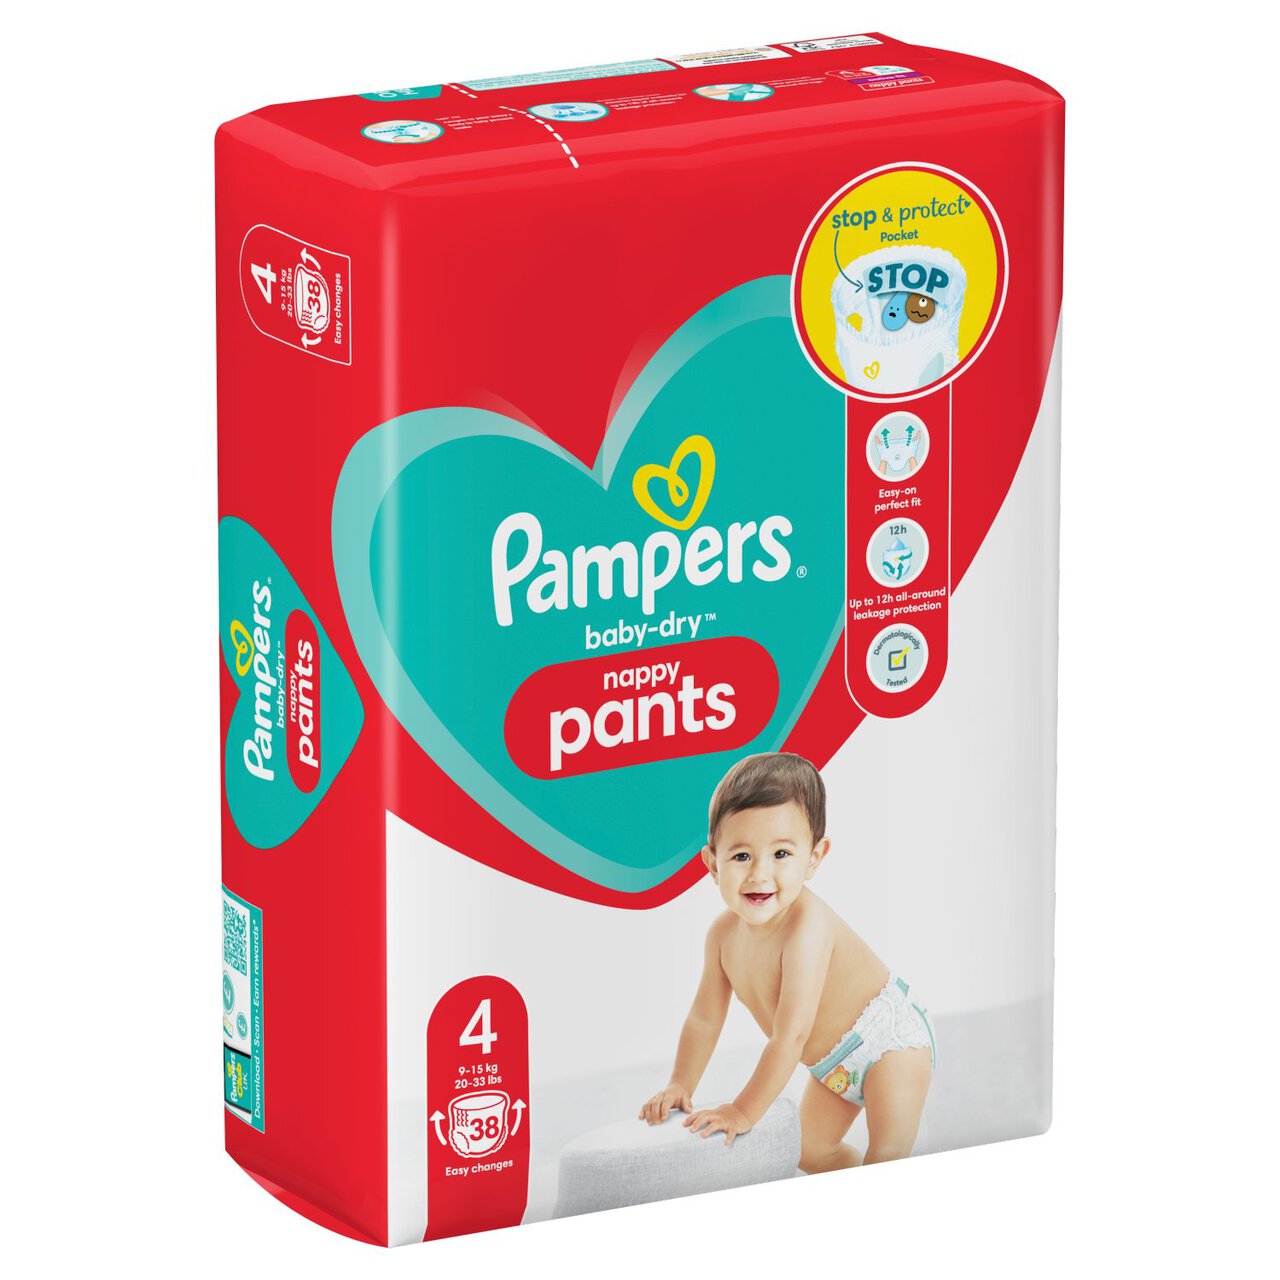 Pampers Baby-Dry Nappy Pants, Size 4 (9-15kg) Essential Pack 38 per pack